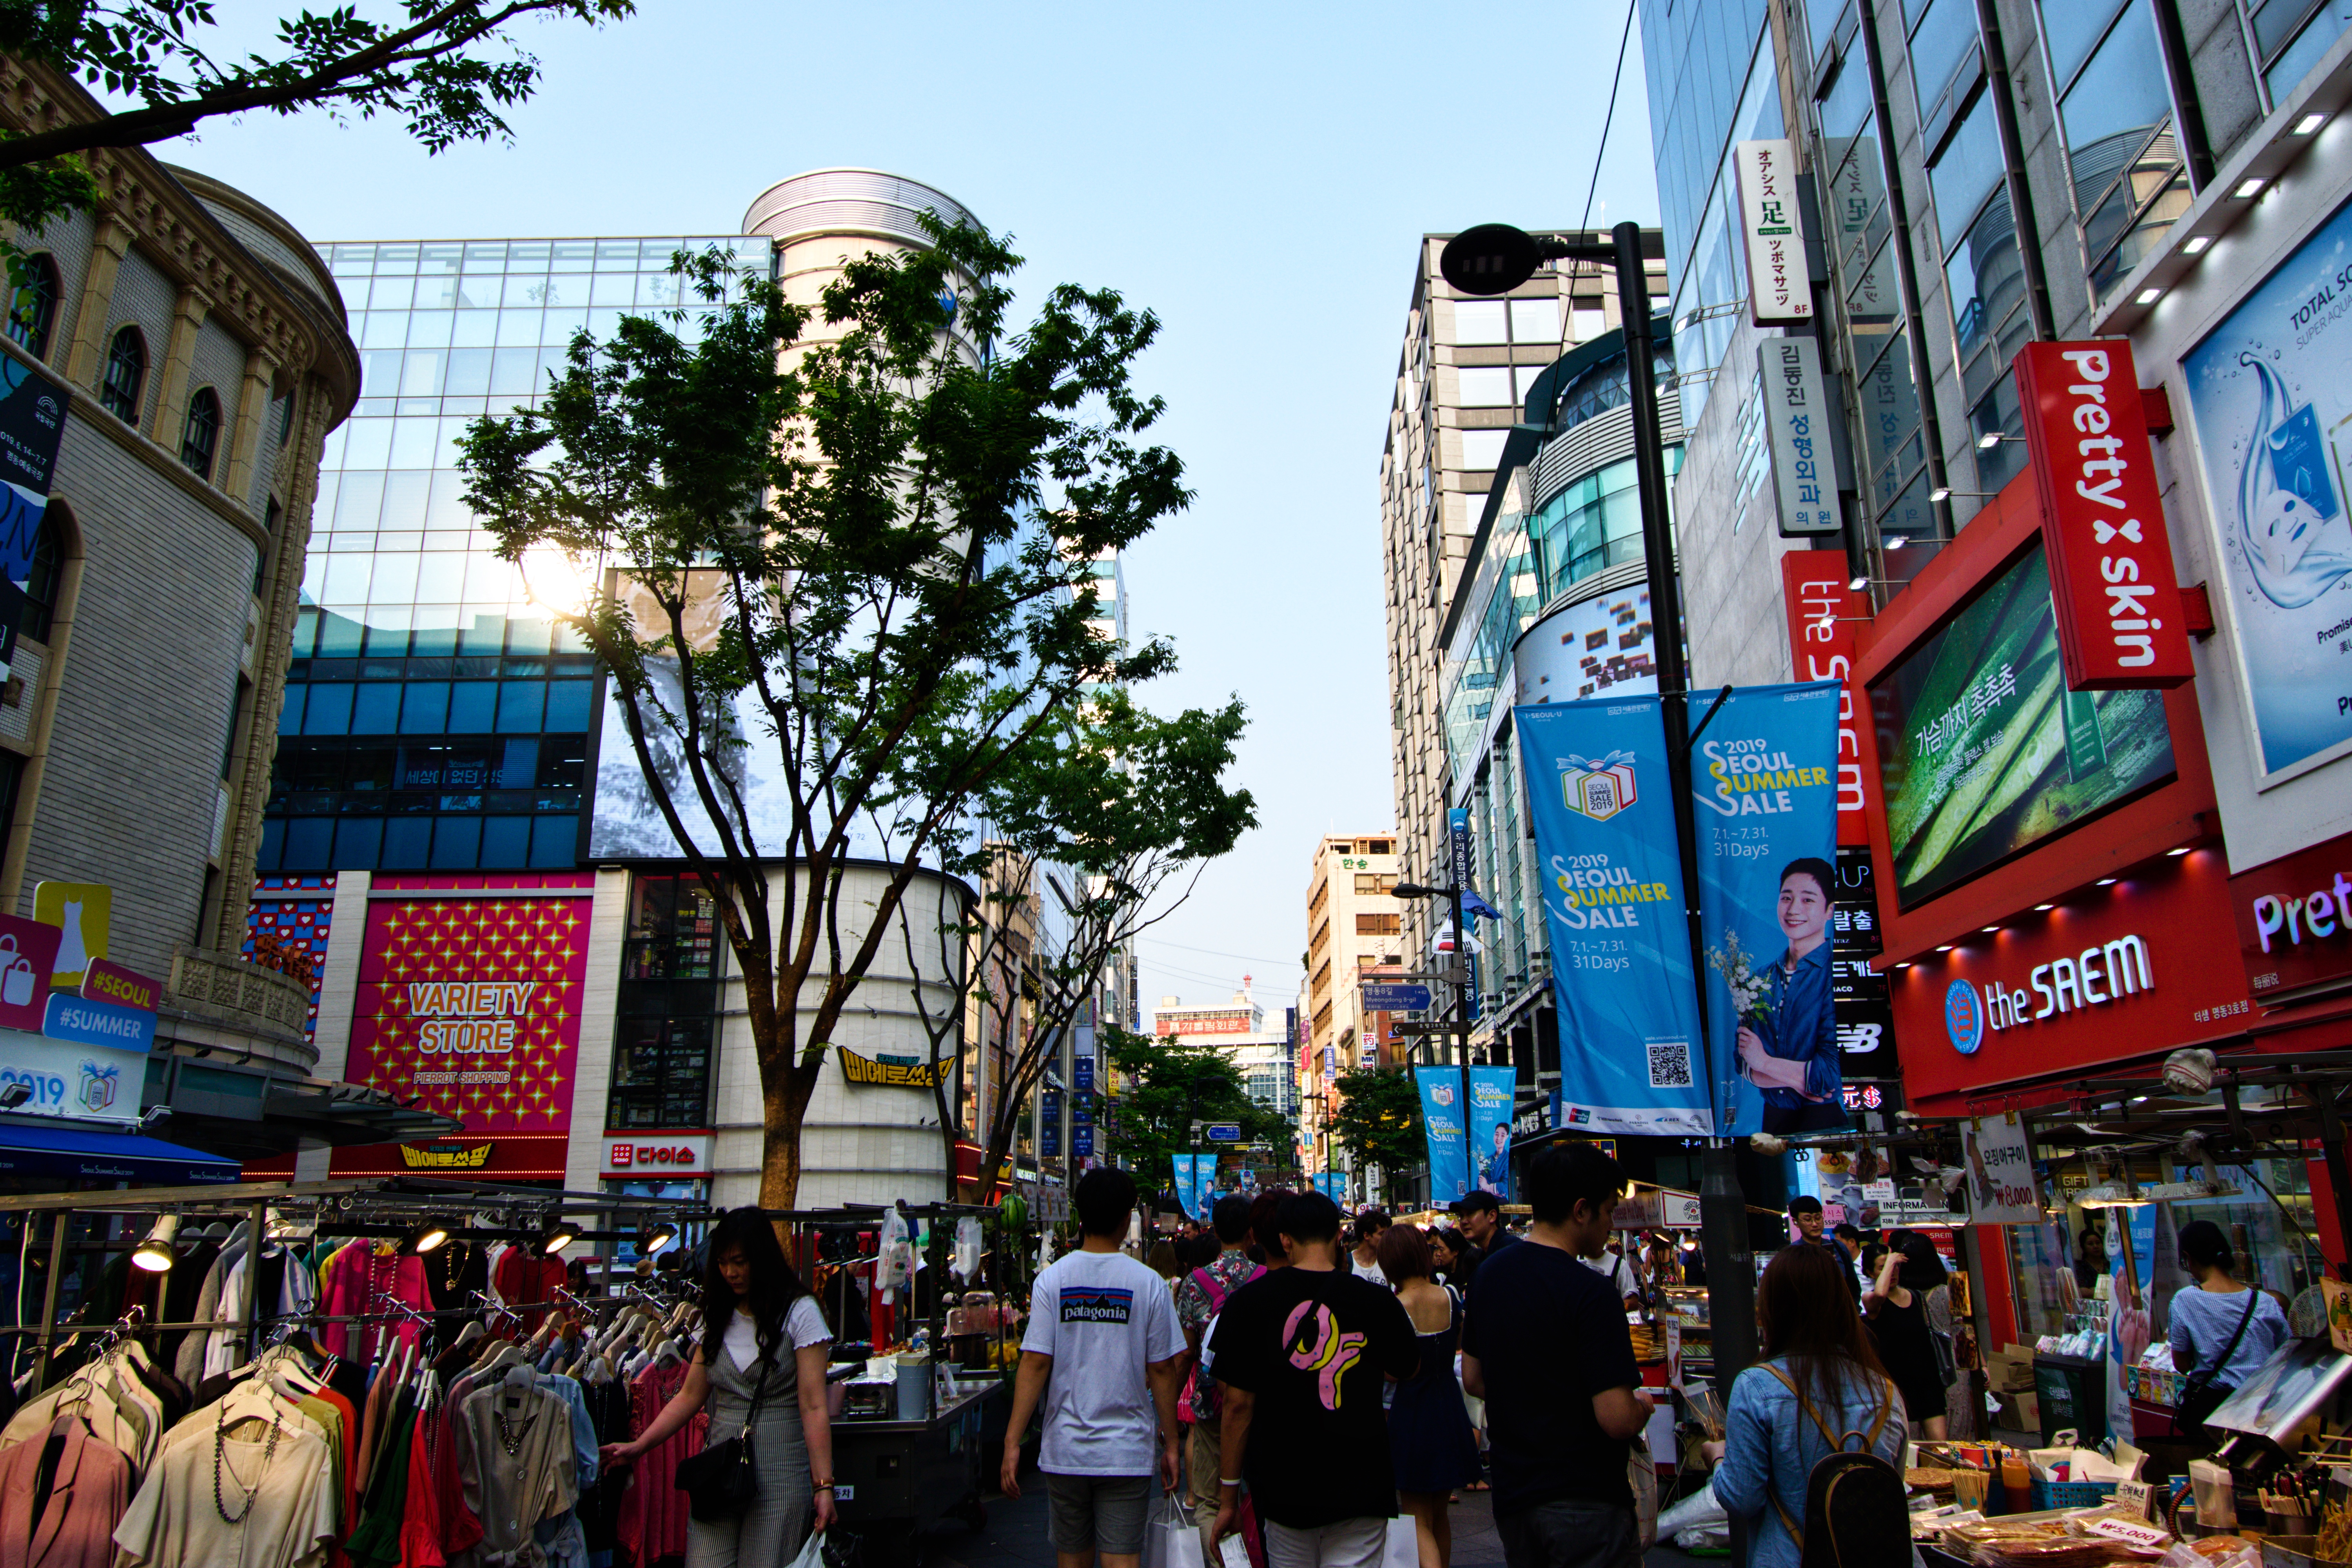 Myeongdong Market Seoul 1 Away With Words Travel Blog From Dubai To The World Korean people and tourists shopping on shopping street popular and latest fashion center of korea on january 30, 2016 at myeongdong market in seoul, south korea. away with words